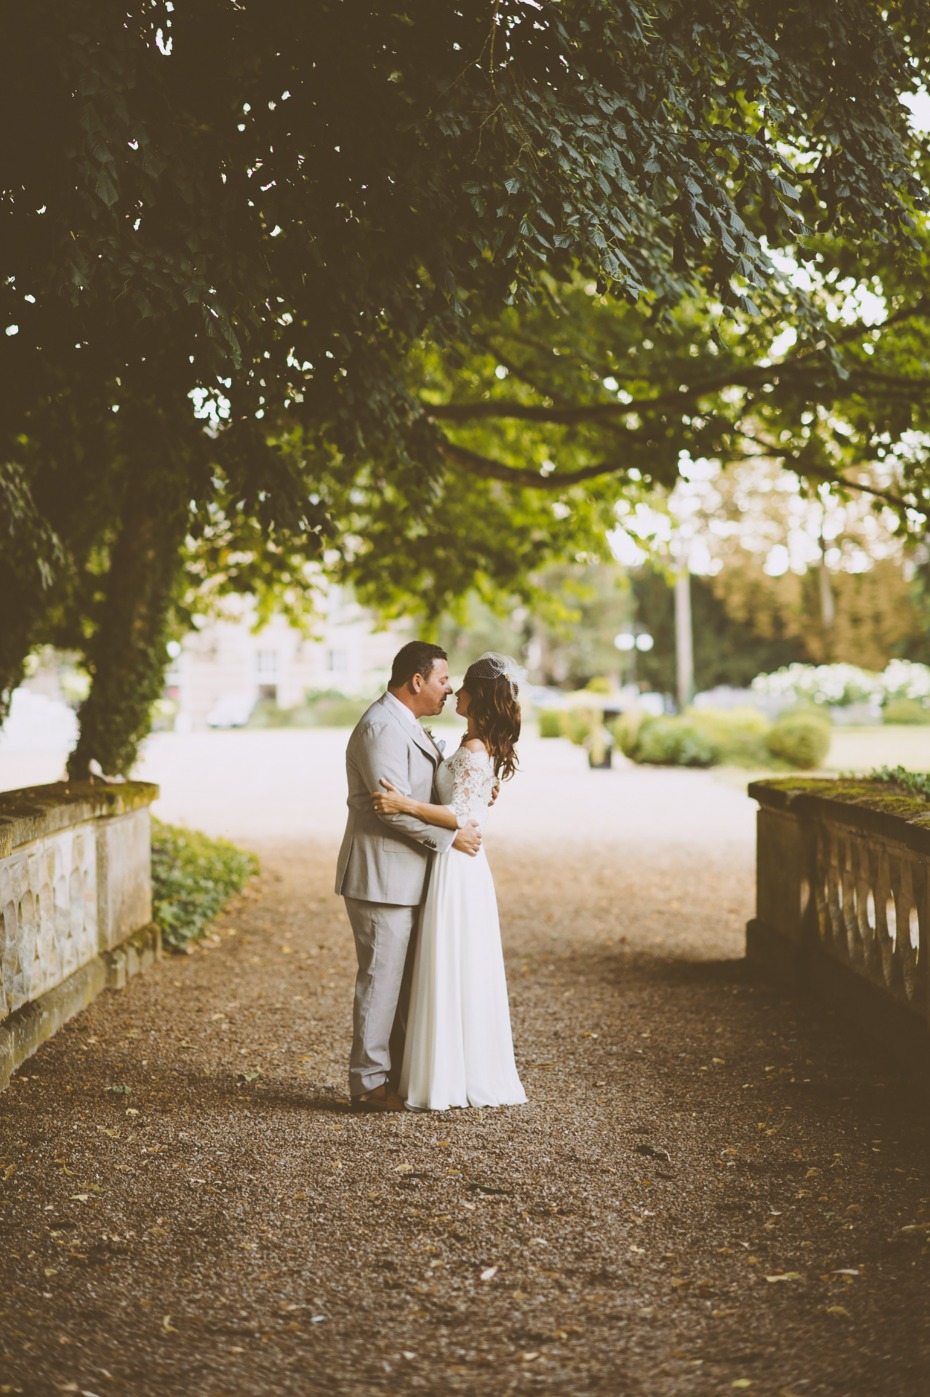 Wedding at Chateau Challain in France